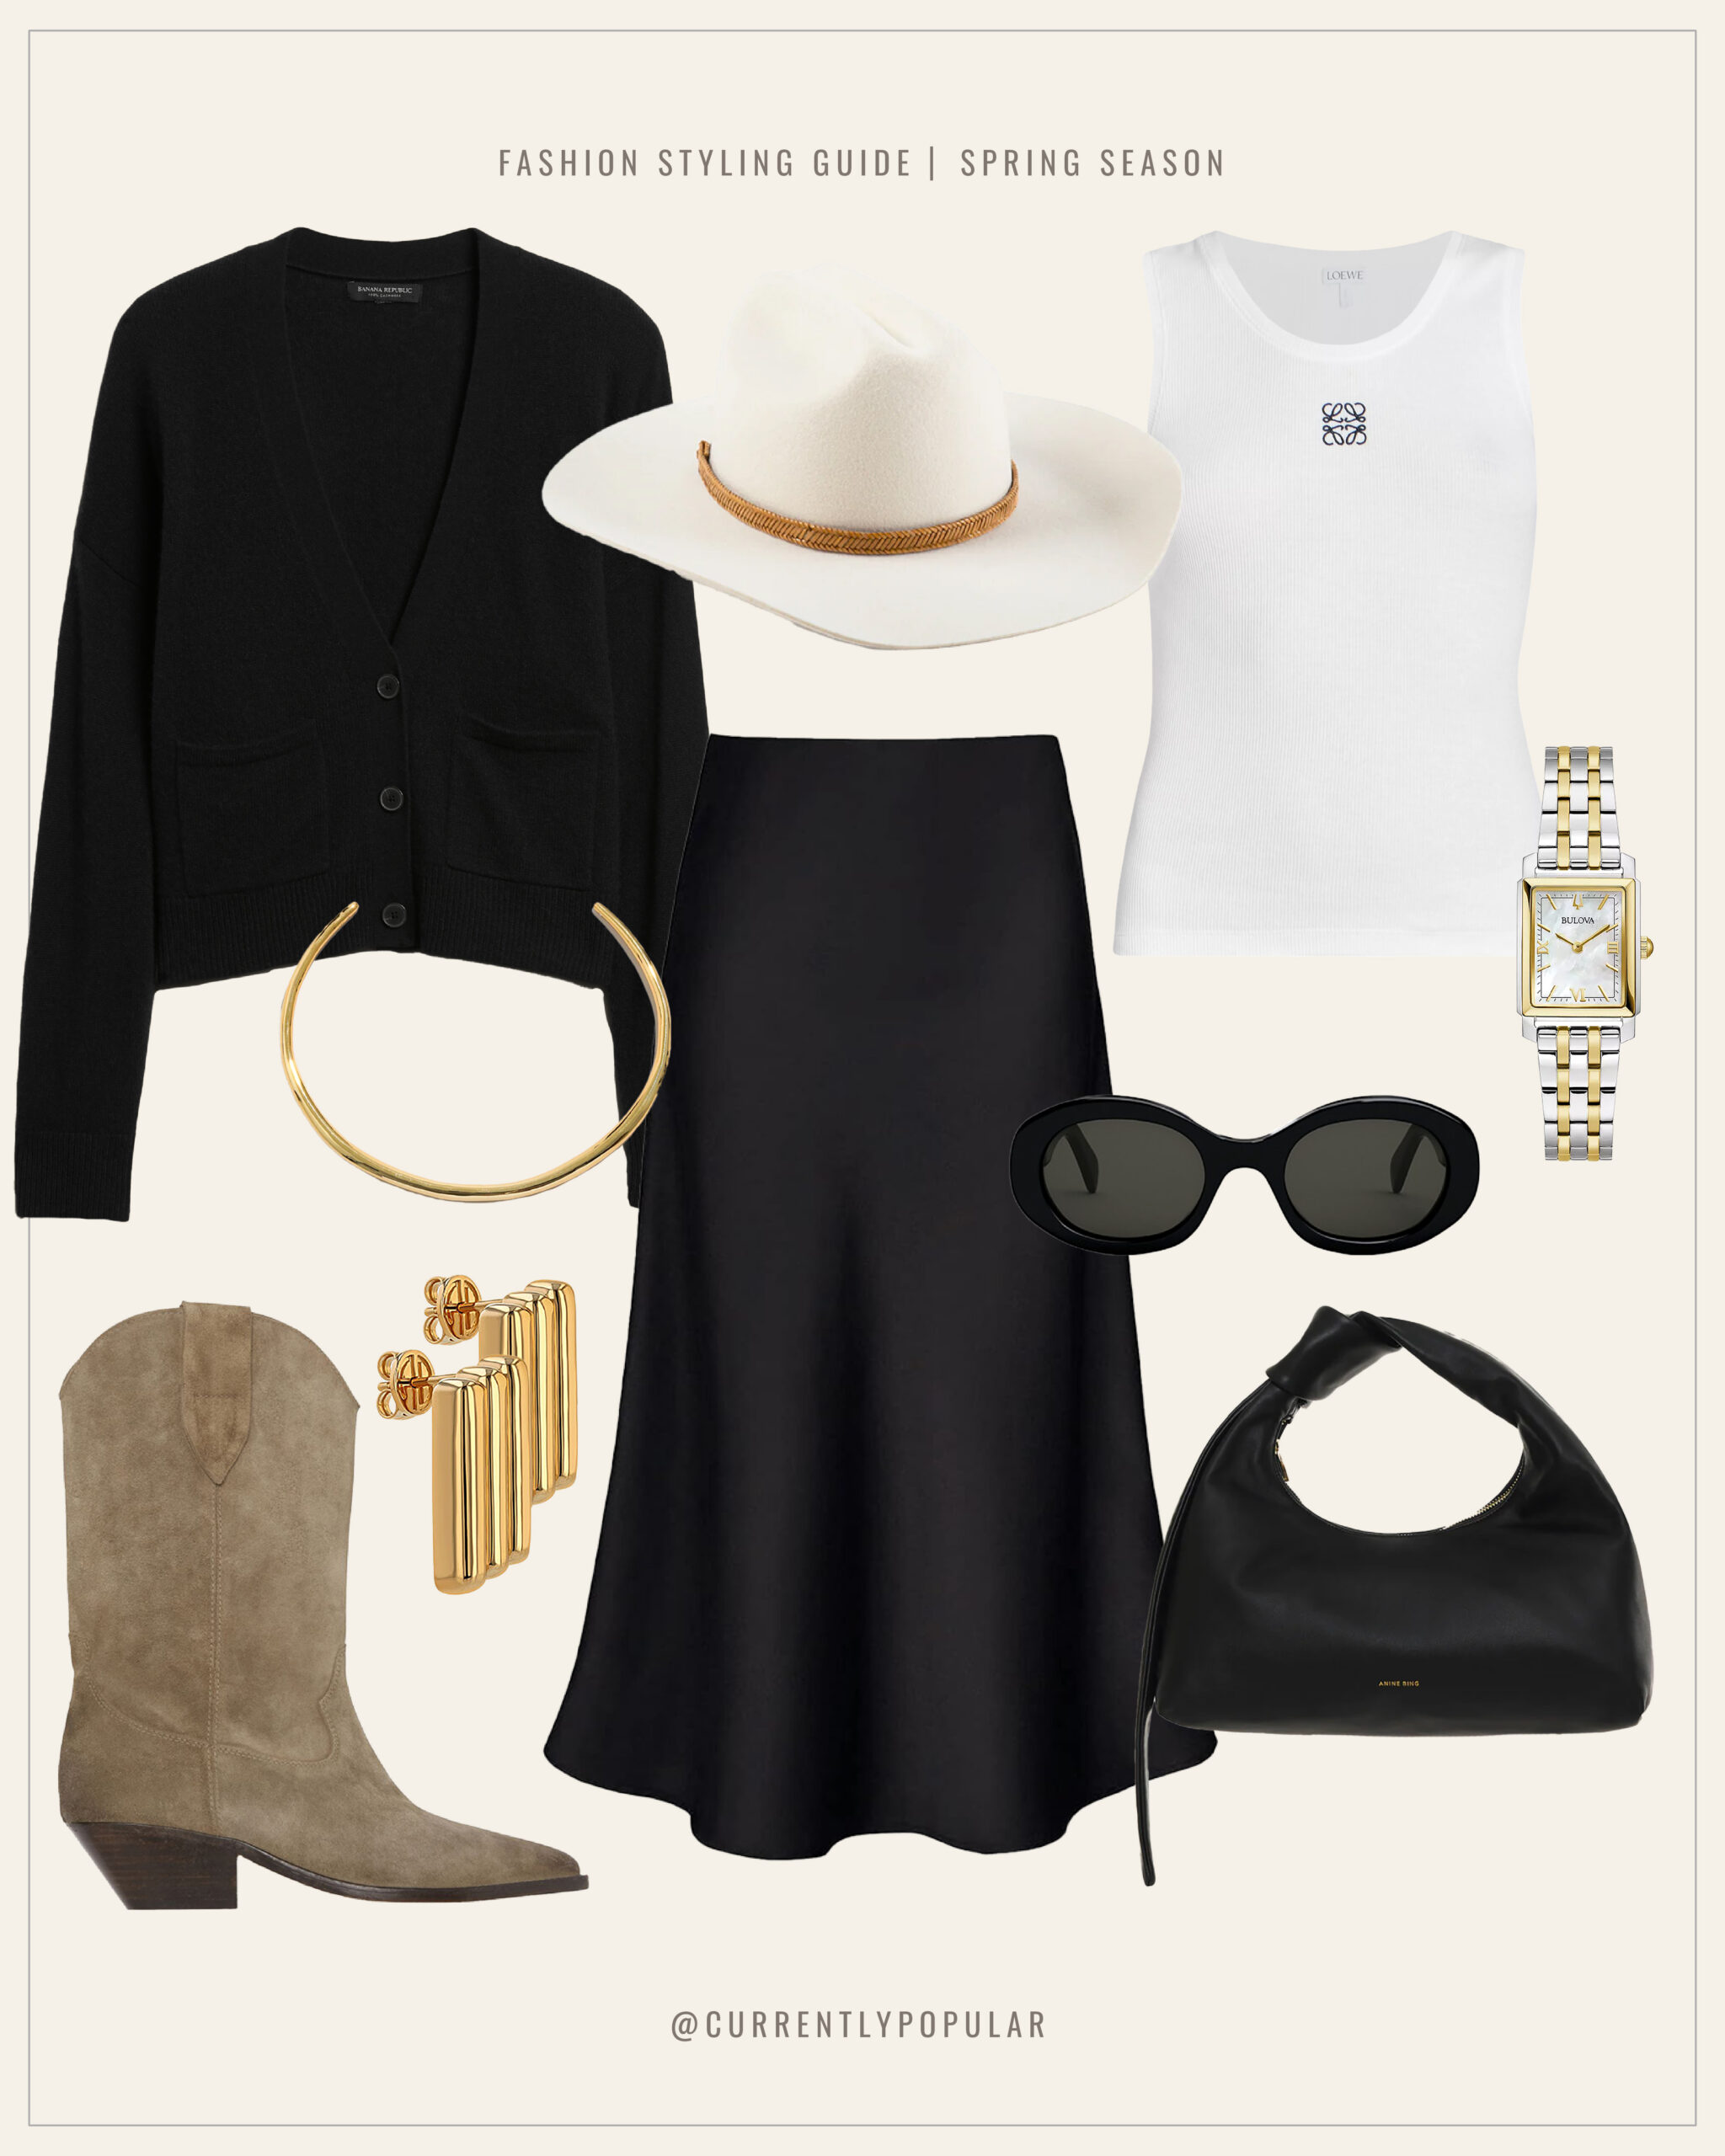 This is an image of a city cowgirl inspired outfit. It features a midi satin black skirt, black cardigan, white tan, white felt cowboy hat, gold jewelry, black purse, black sunglasses and beige suede cowboy boots